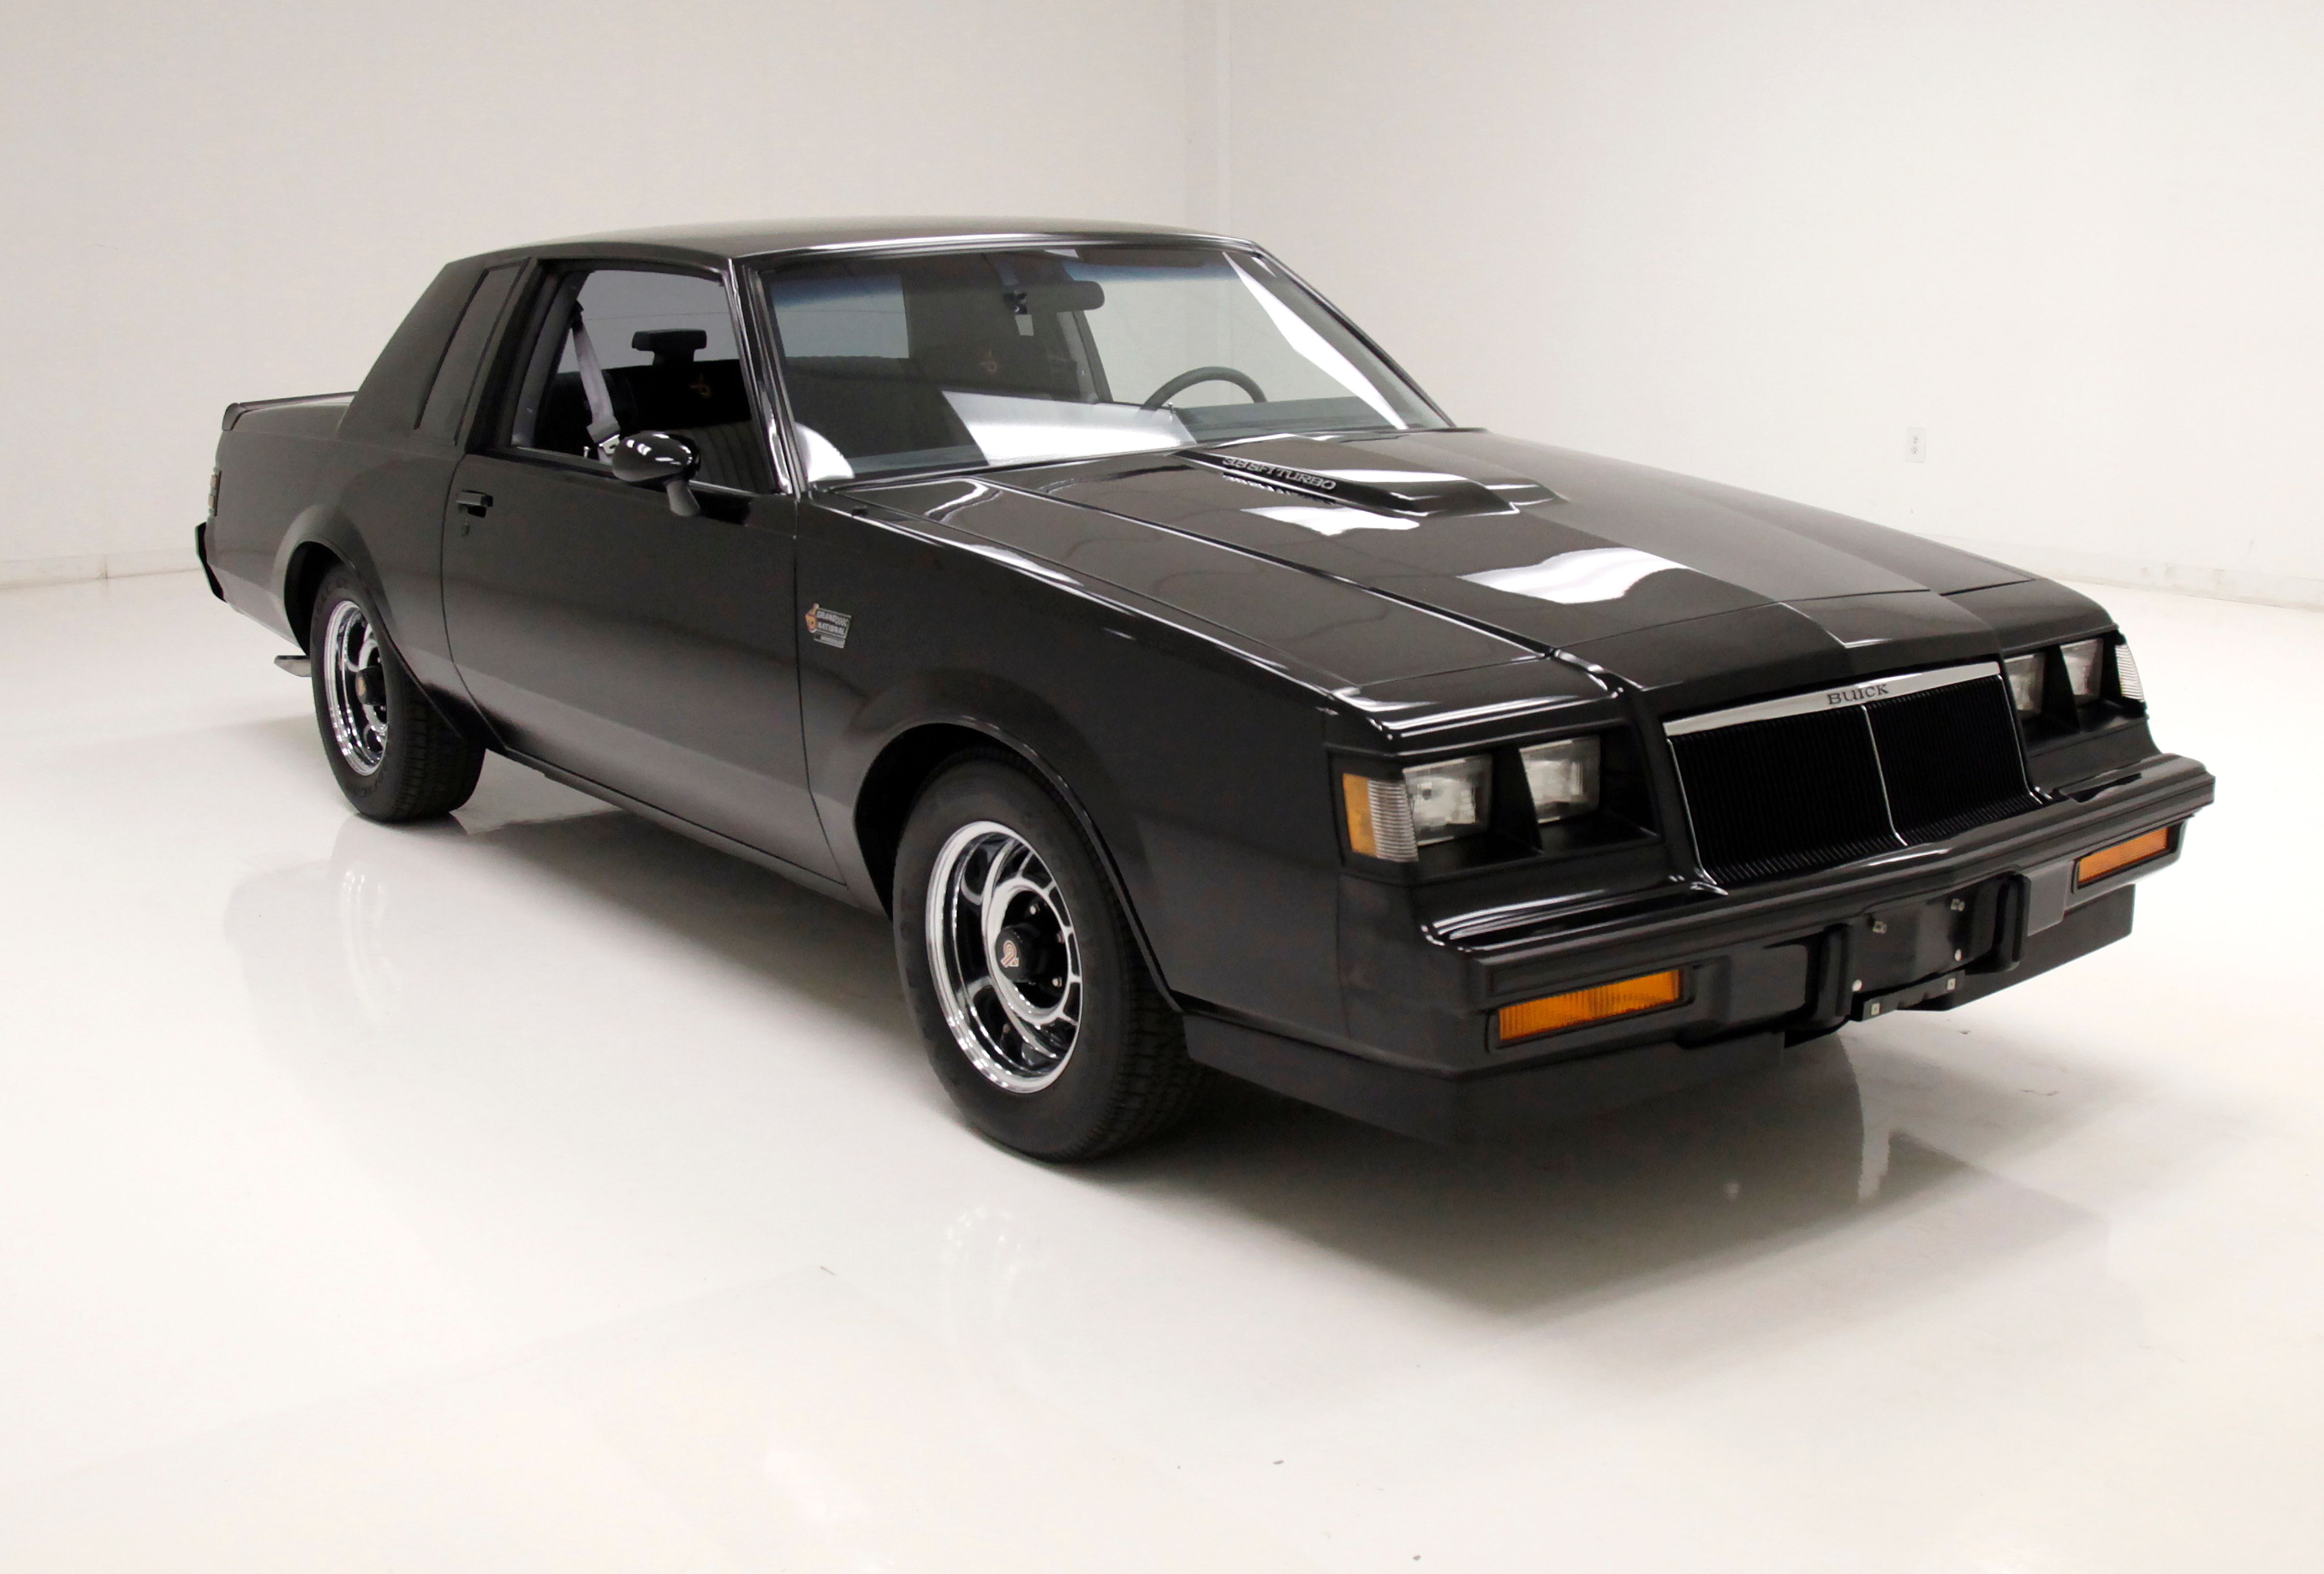 1985 Buick Regal Grand National in the showroom